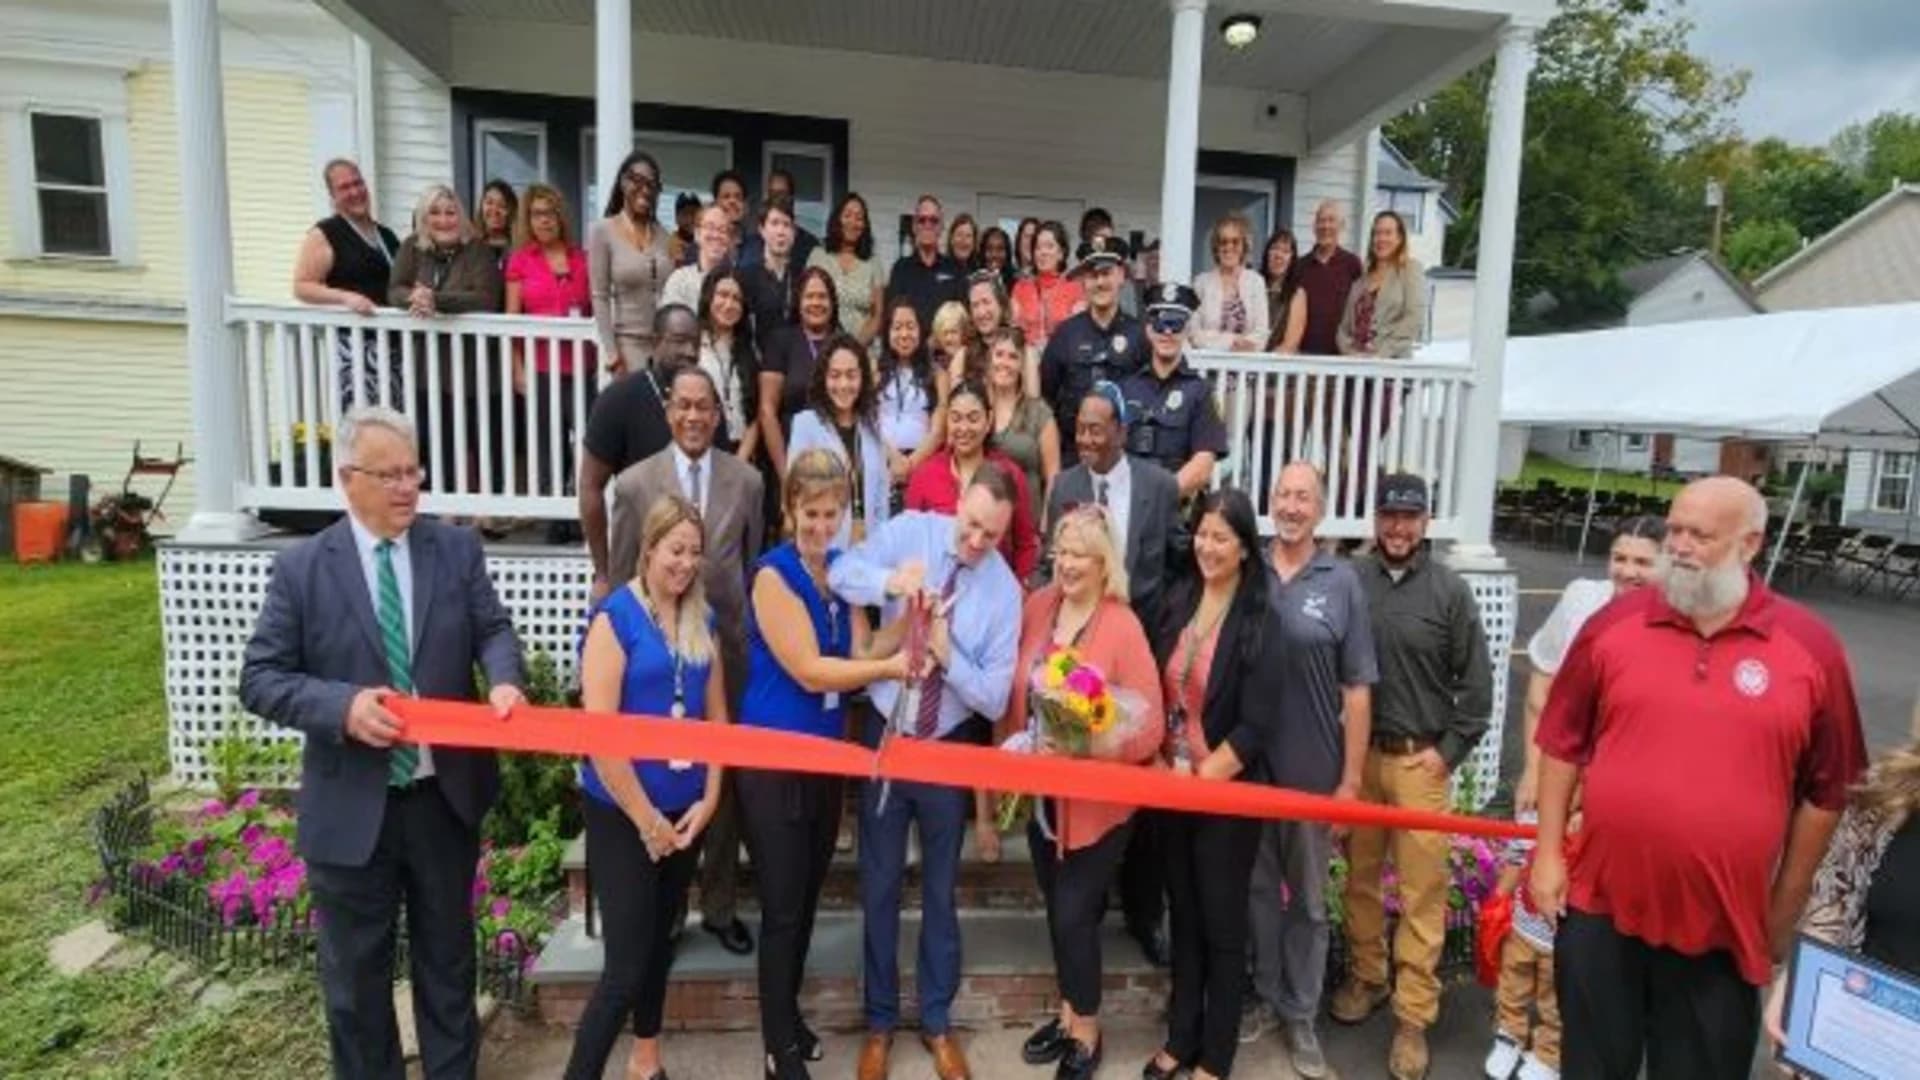 County officials celebrate the grand opening of the Children’s Home Sullivan County